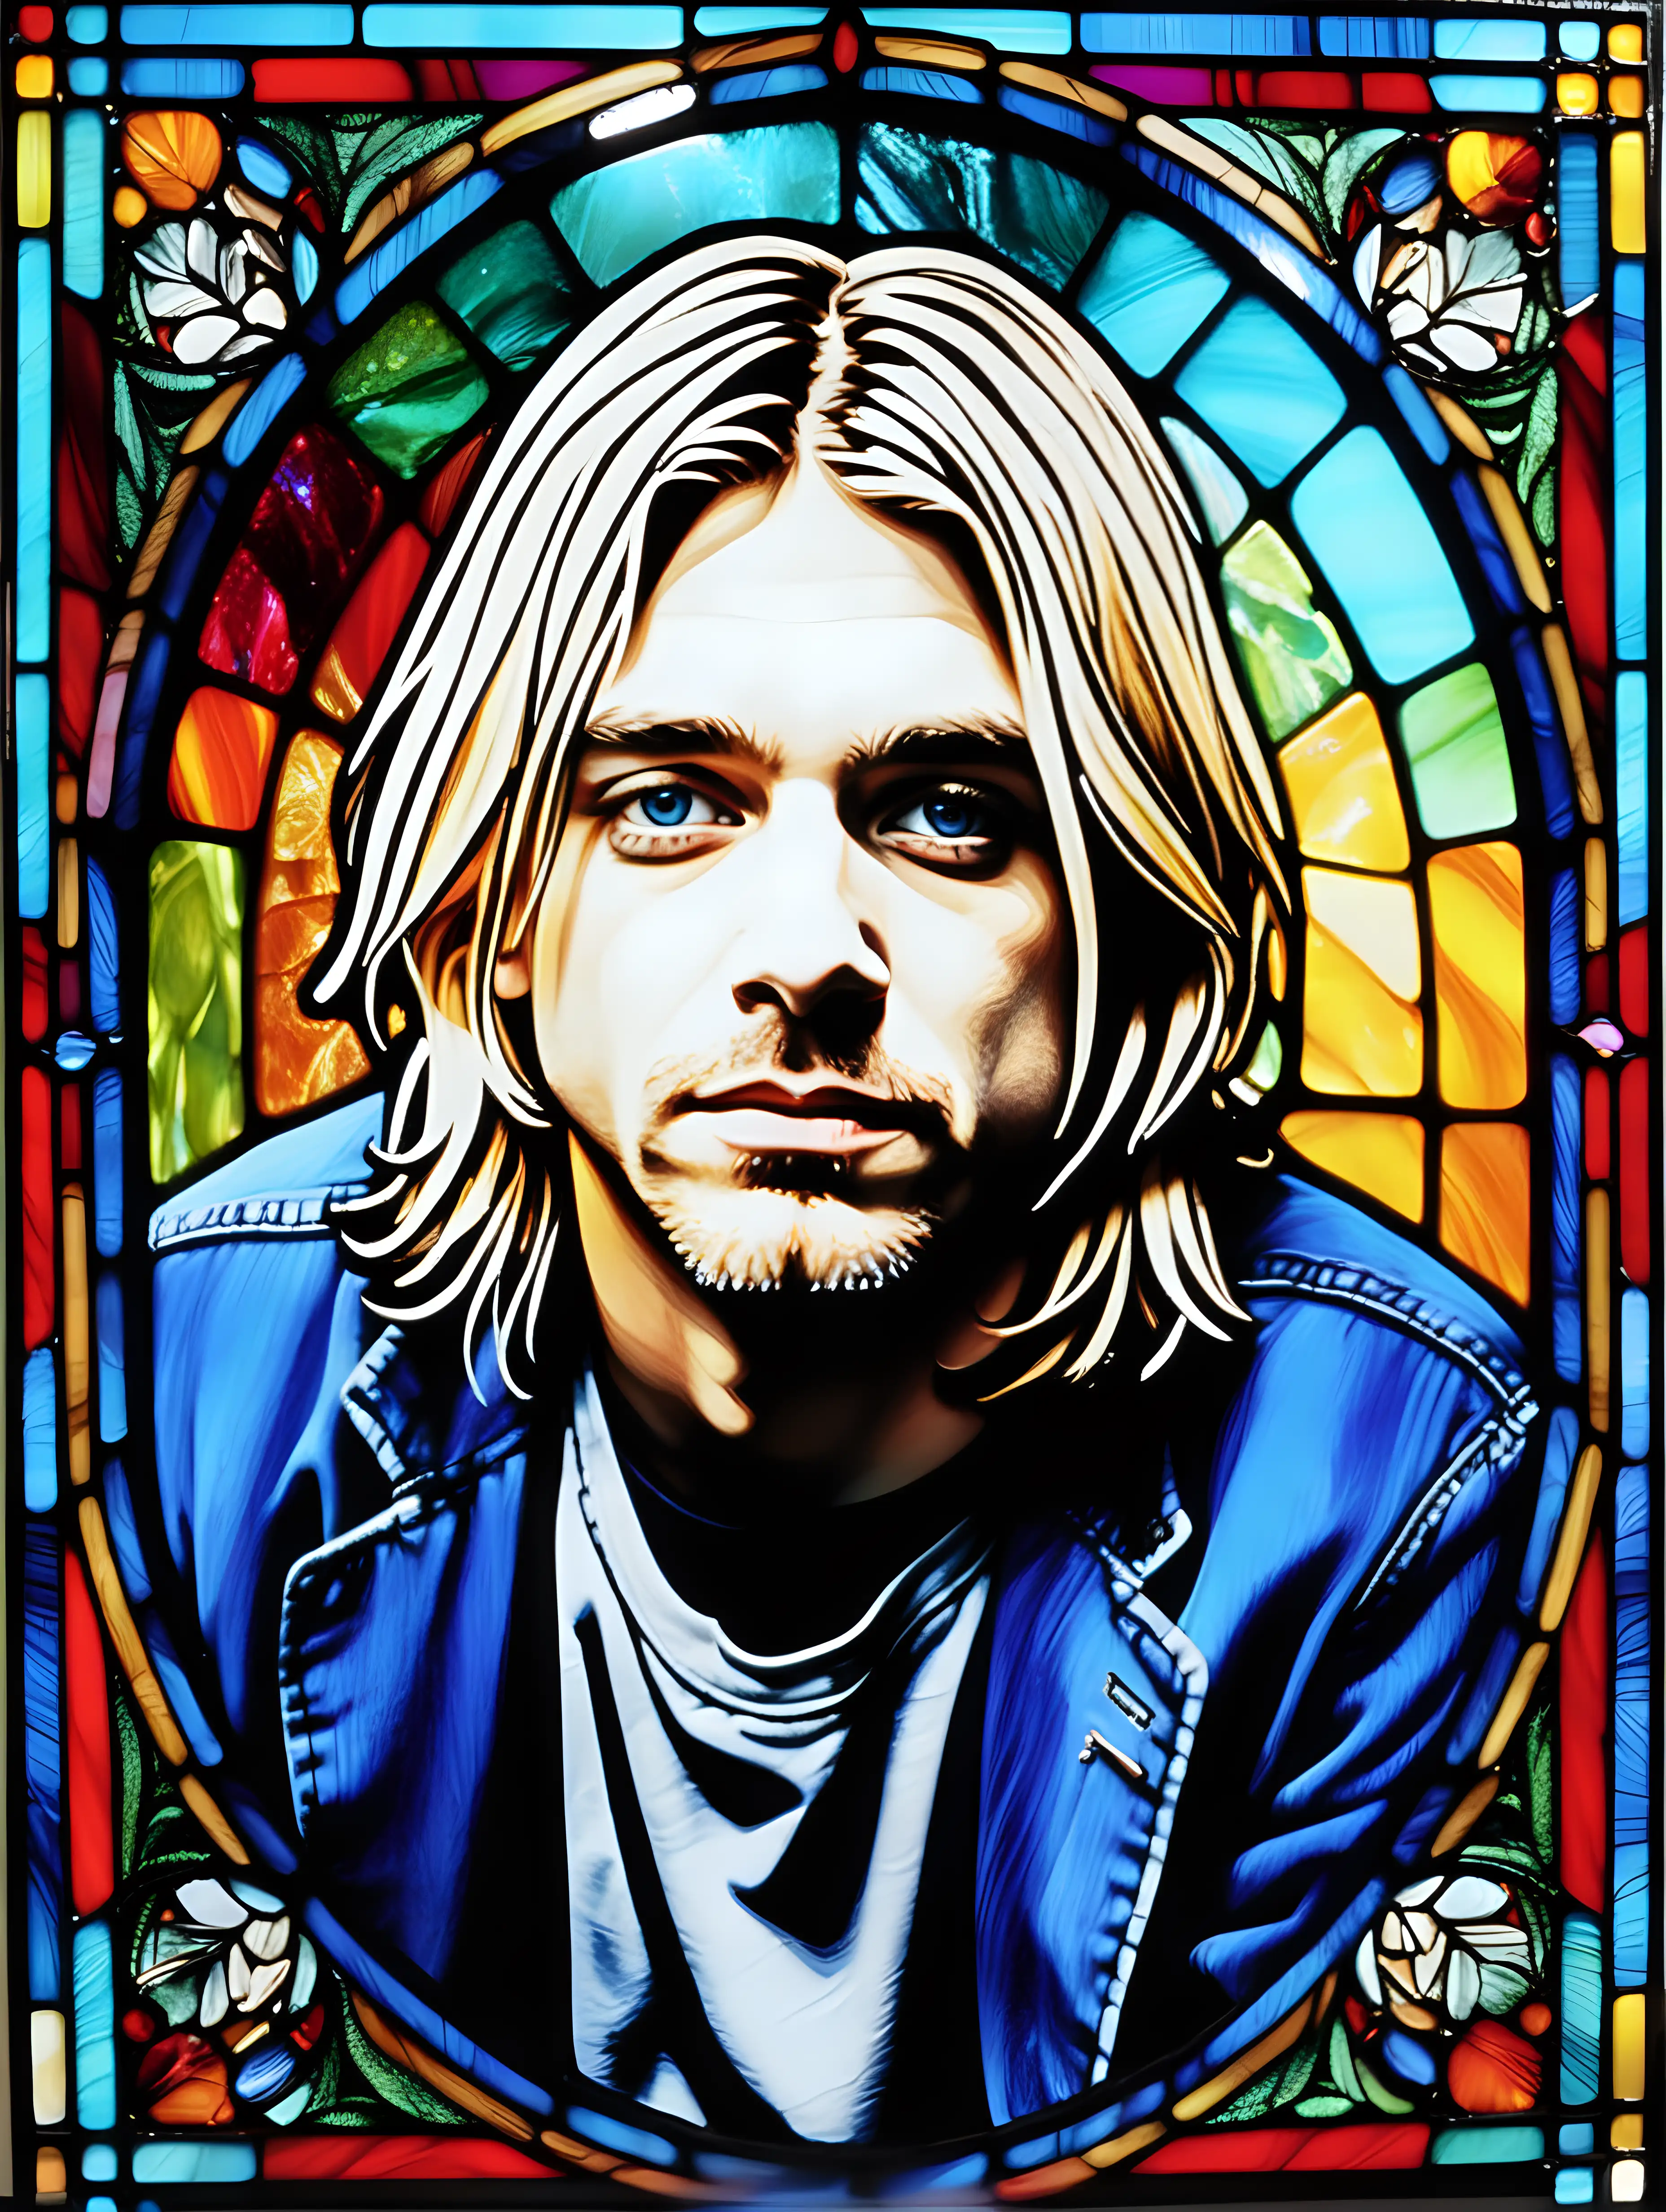 Kurt Cobain in full Stained glass range with vibrant  colors in -q 28:20